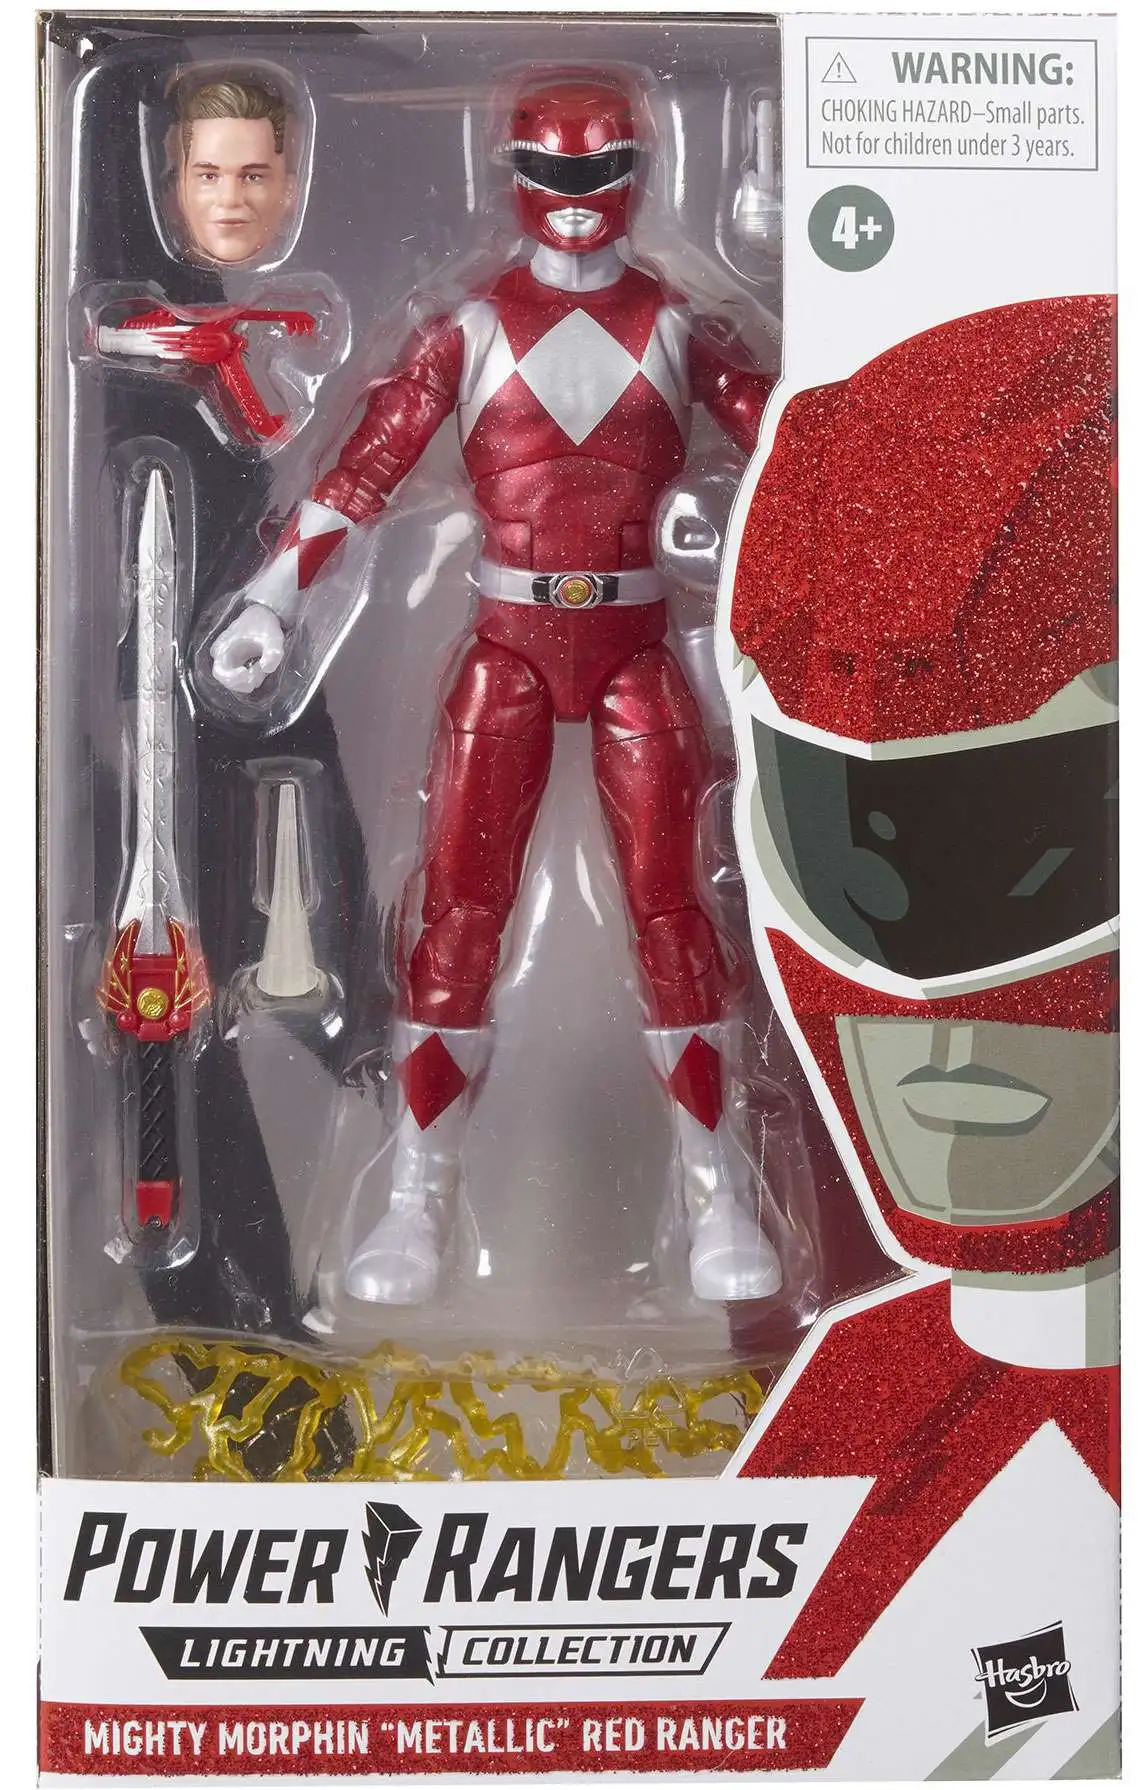 Power Rangers Space ~ PSYCHO RED RANGER LEGACY ACTION FIGURE ~ MMPR Morphin 